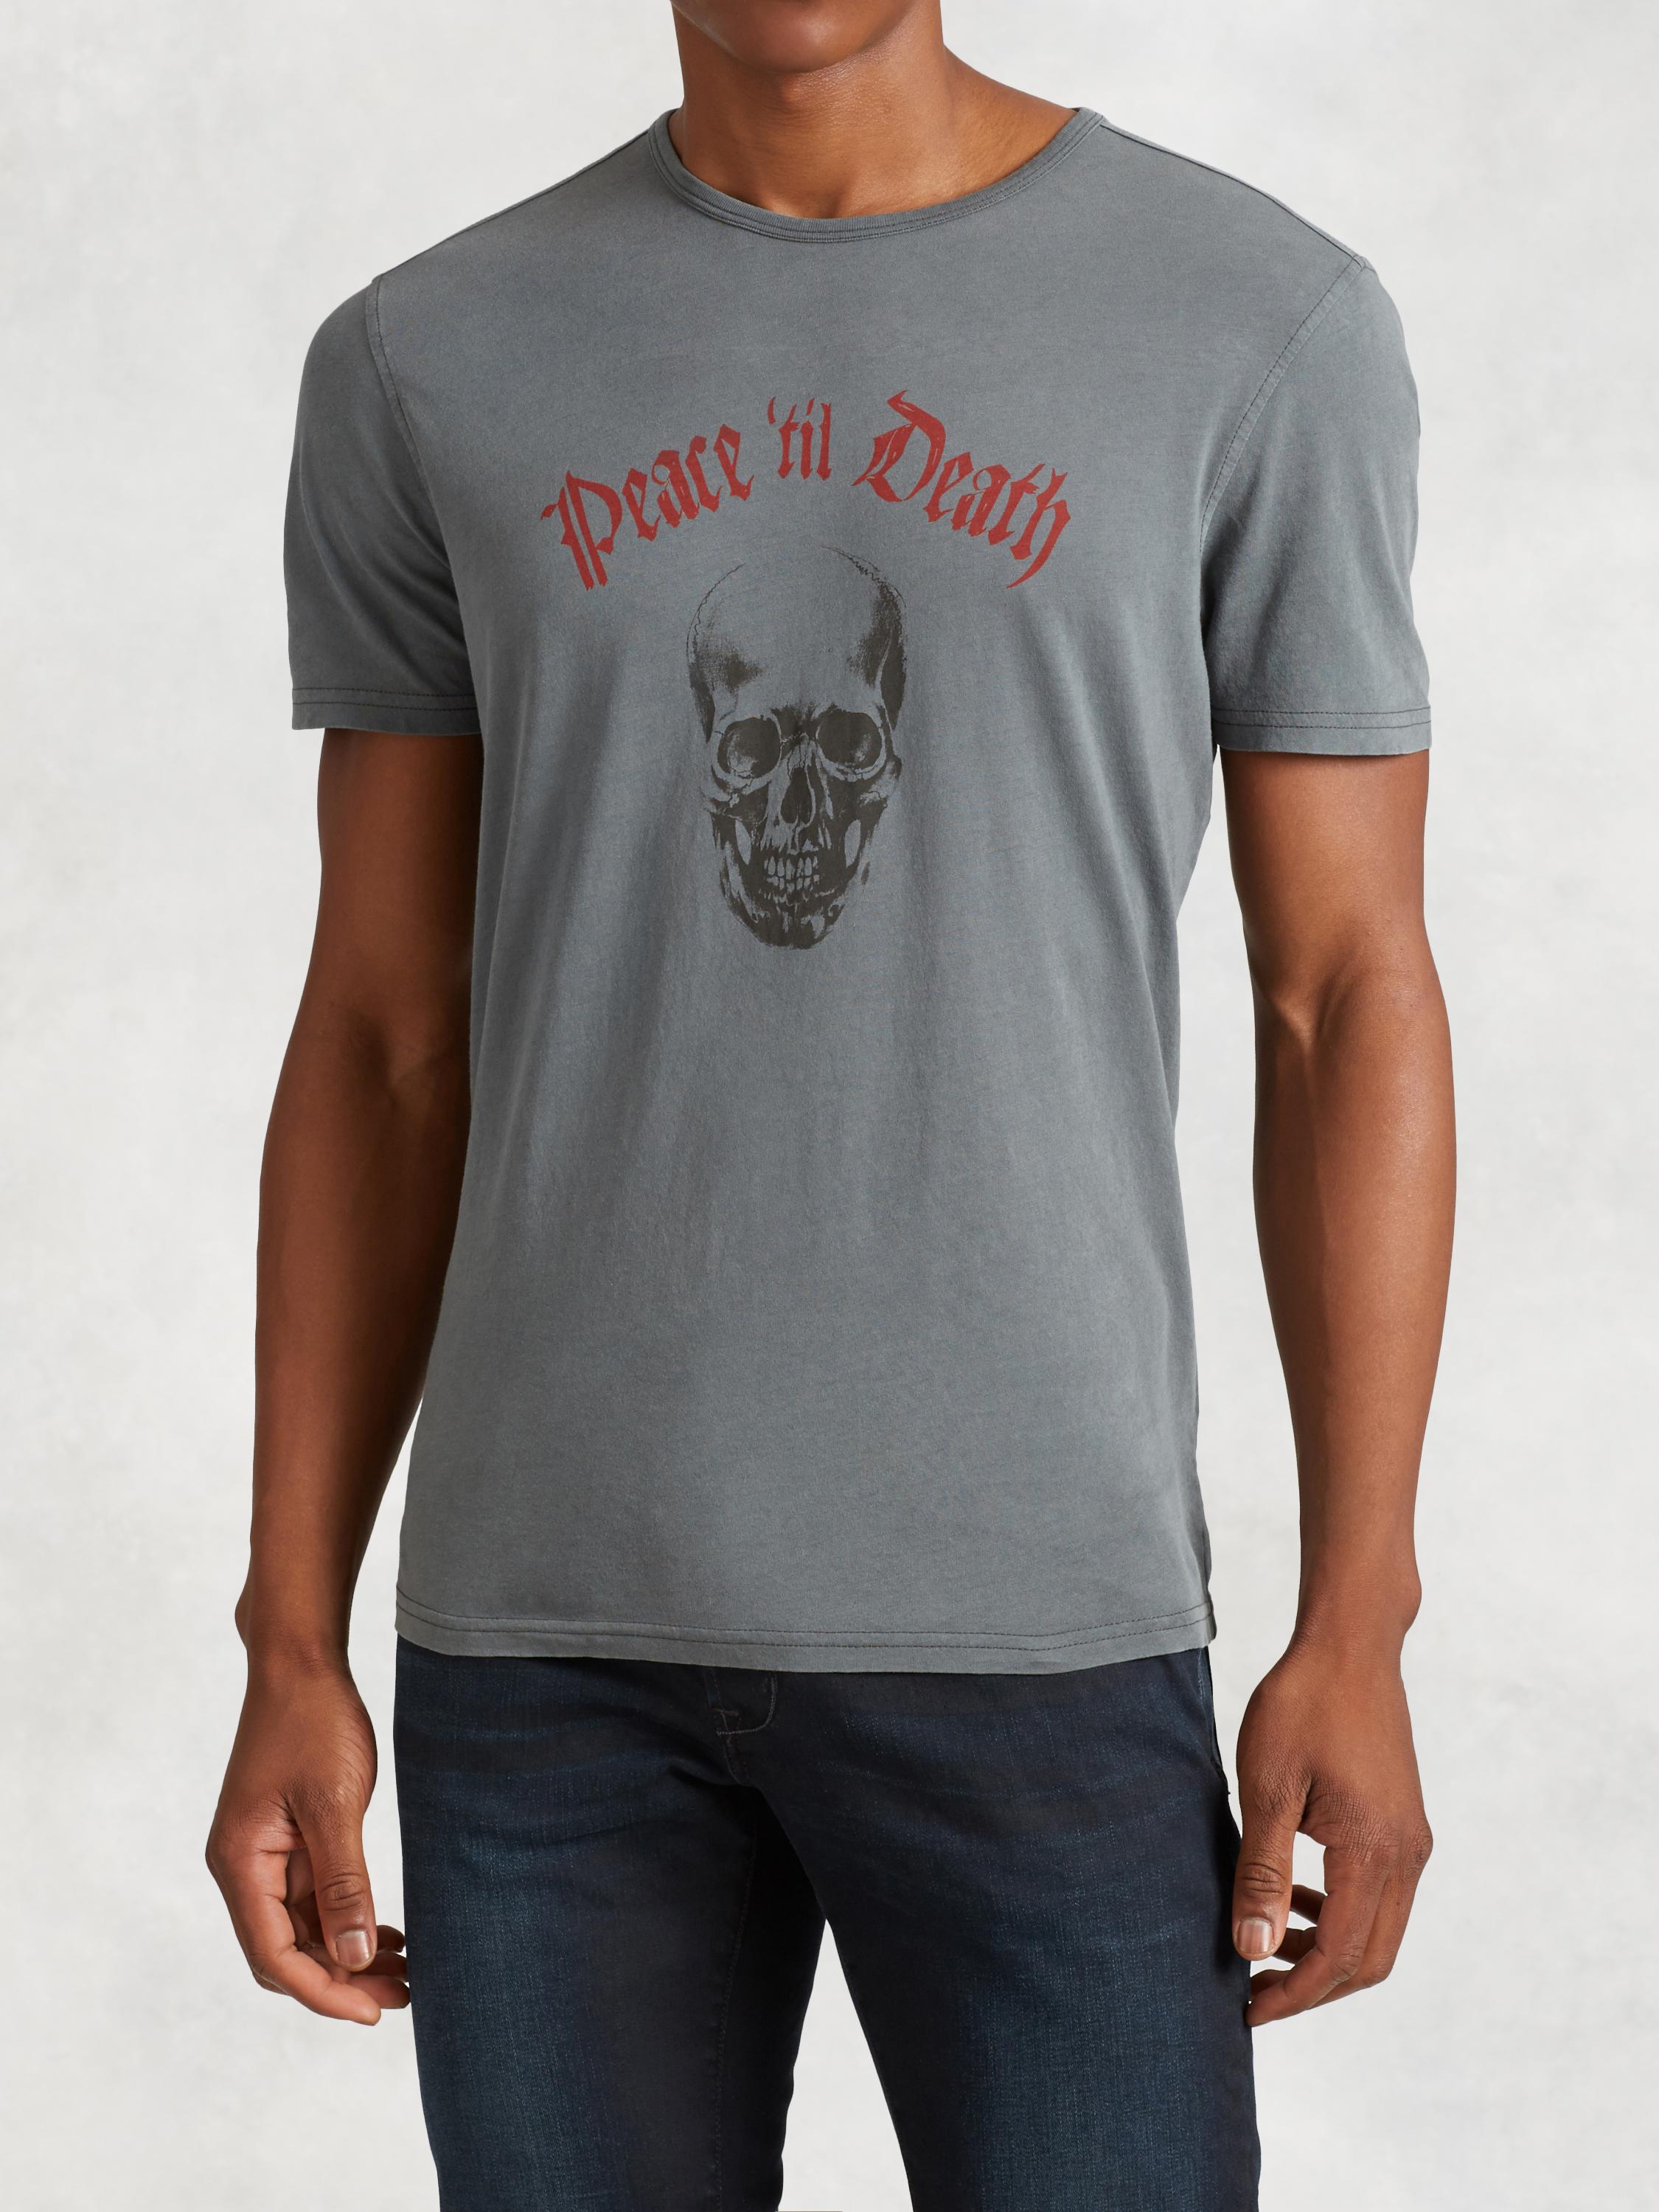 Peace 'Til Death Graphic Tee image number 1